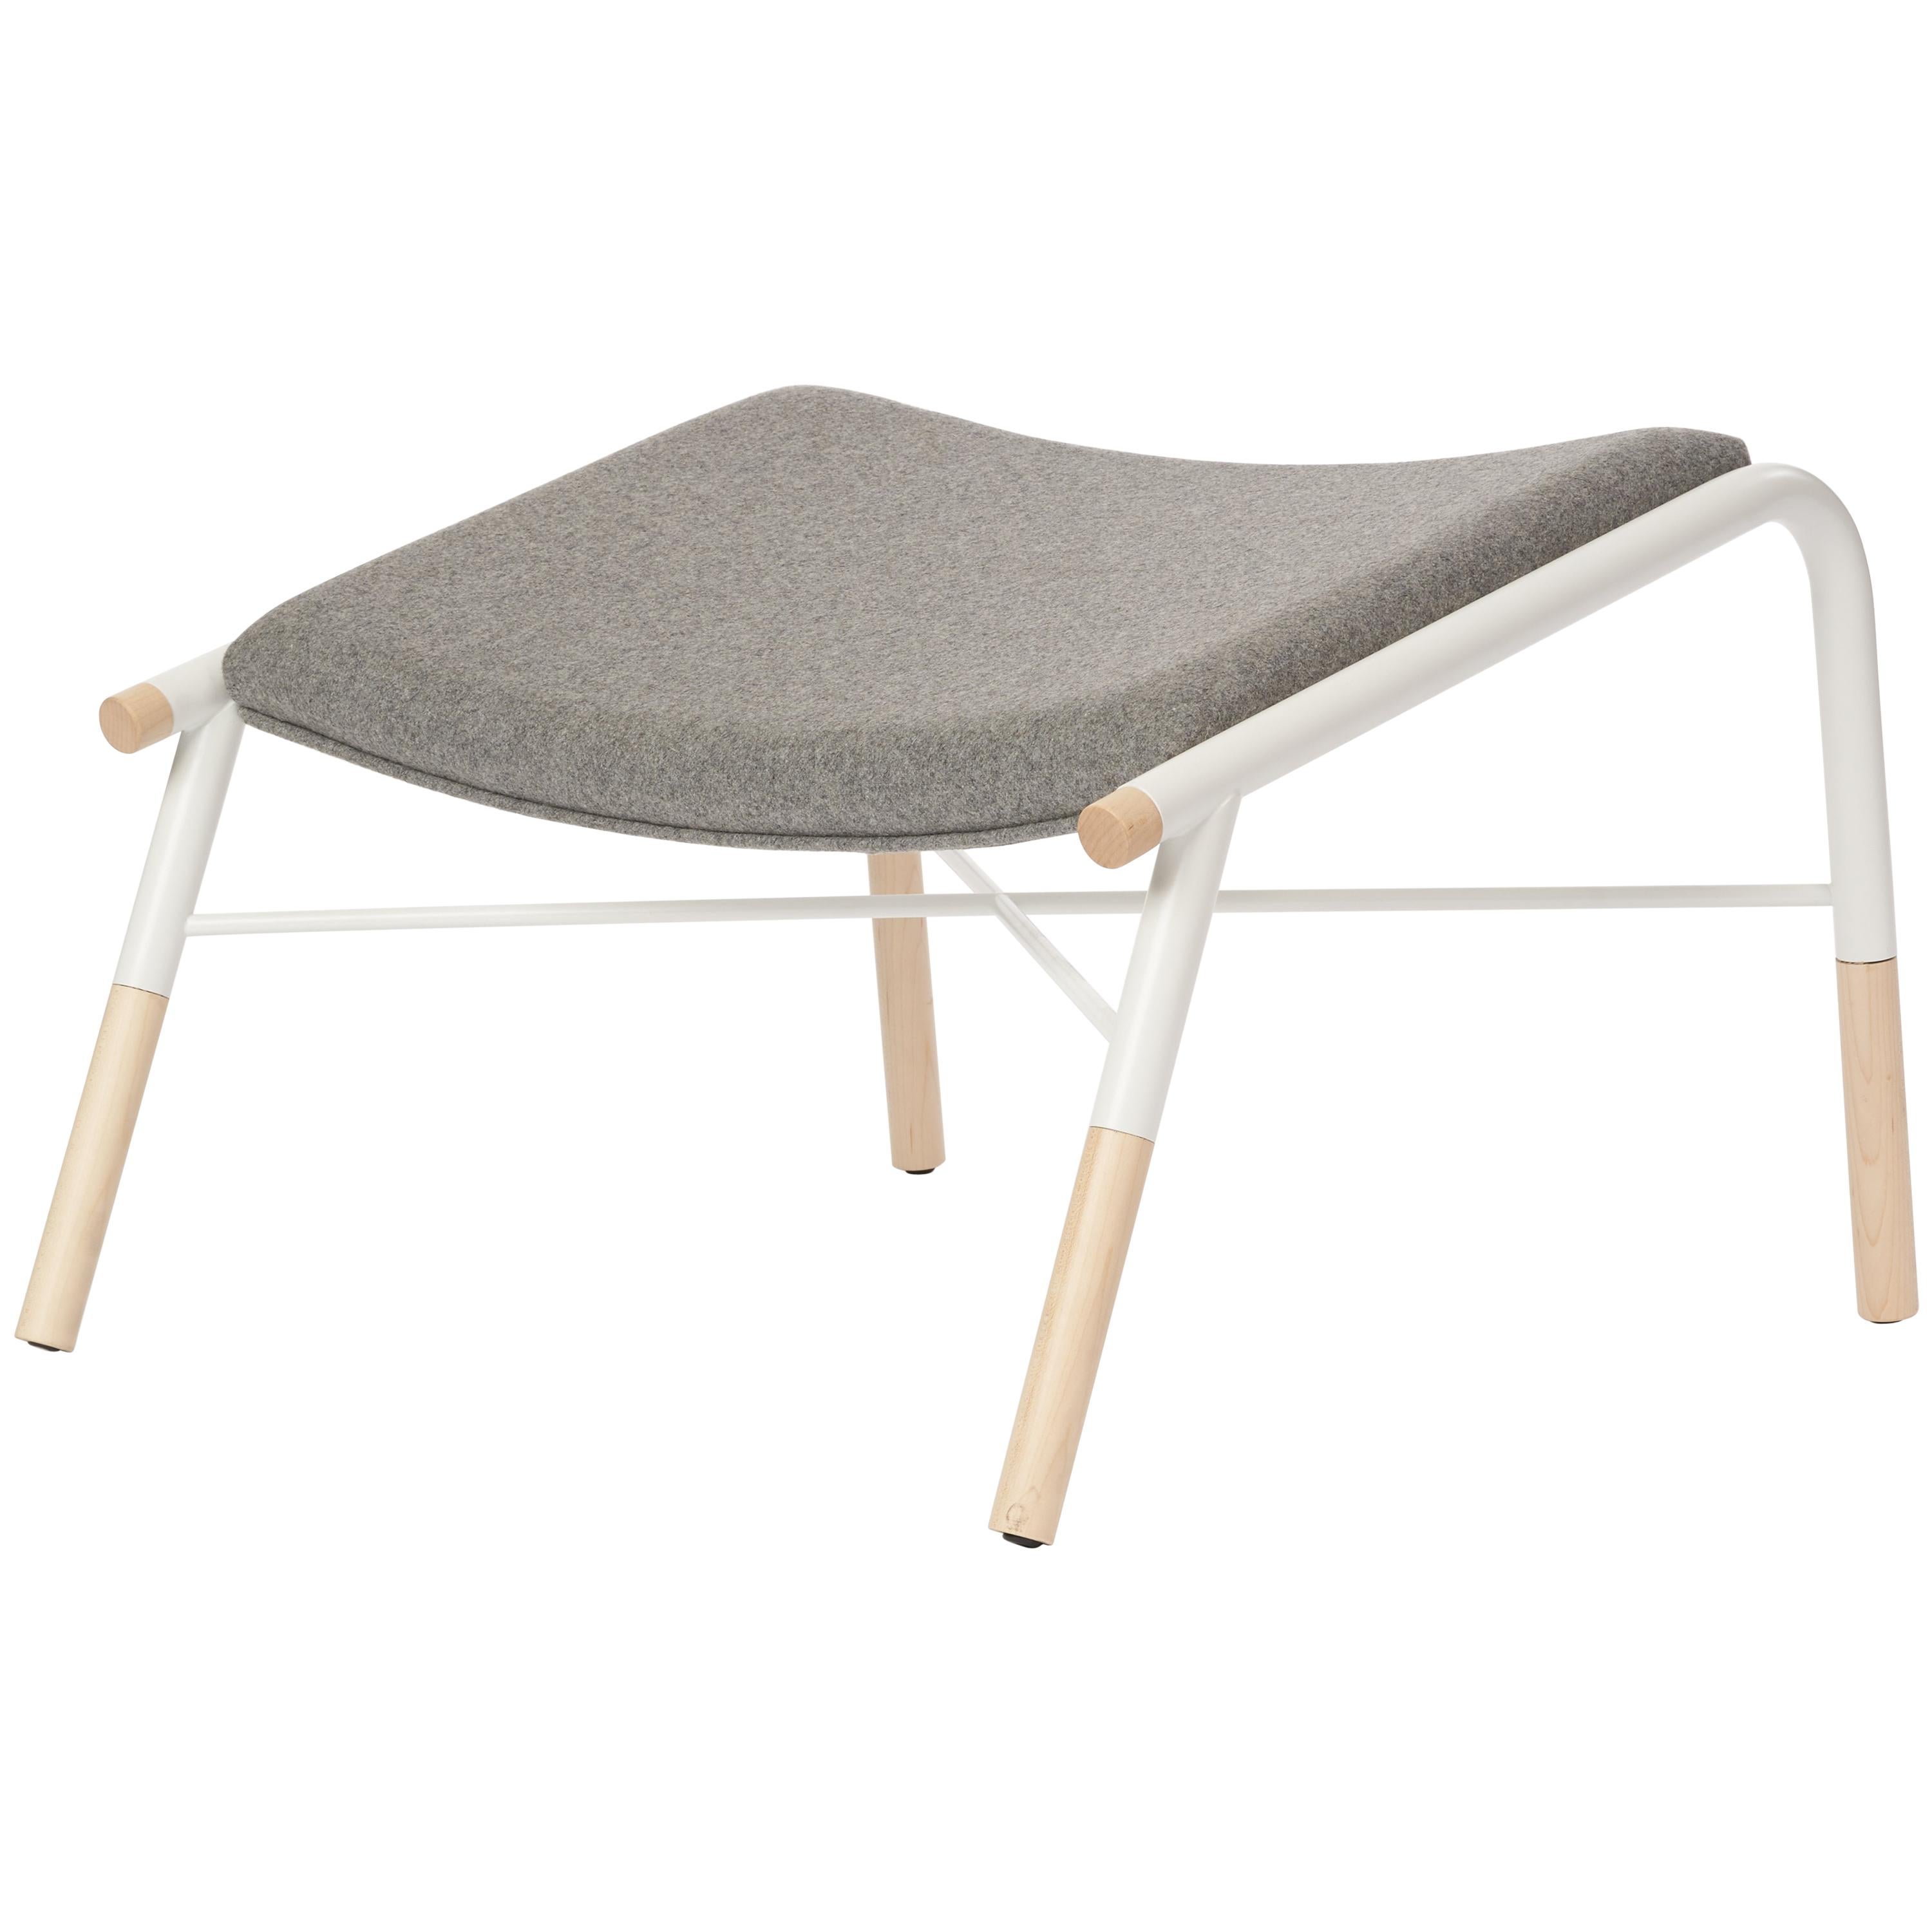 49n Lounge Chair Ottoman, Melton Wool and Eco-Friendly Powder Coated Steel Frame For Sale